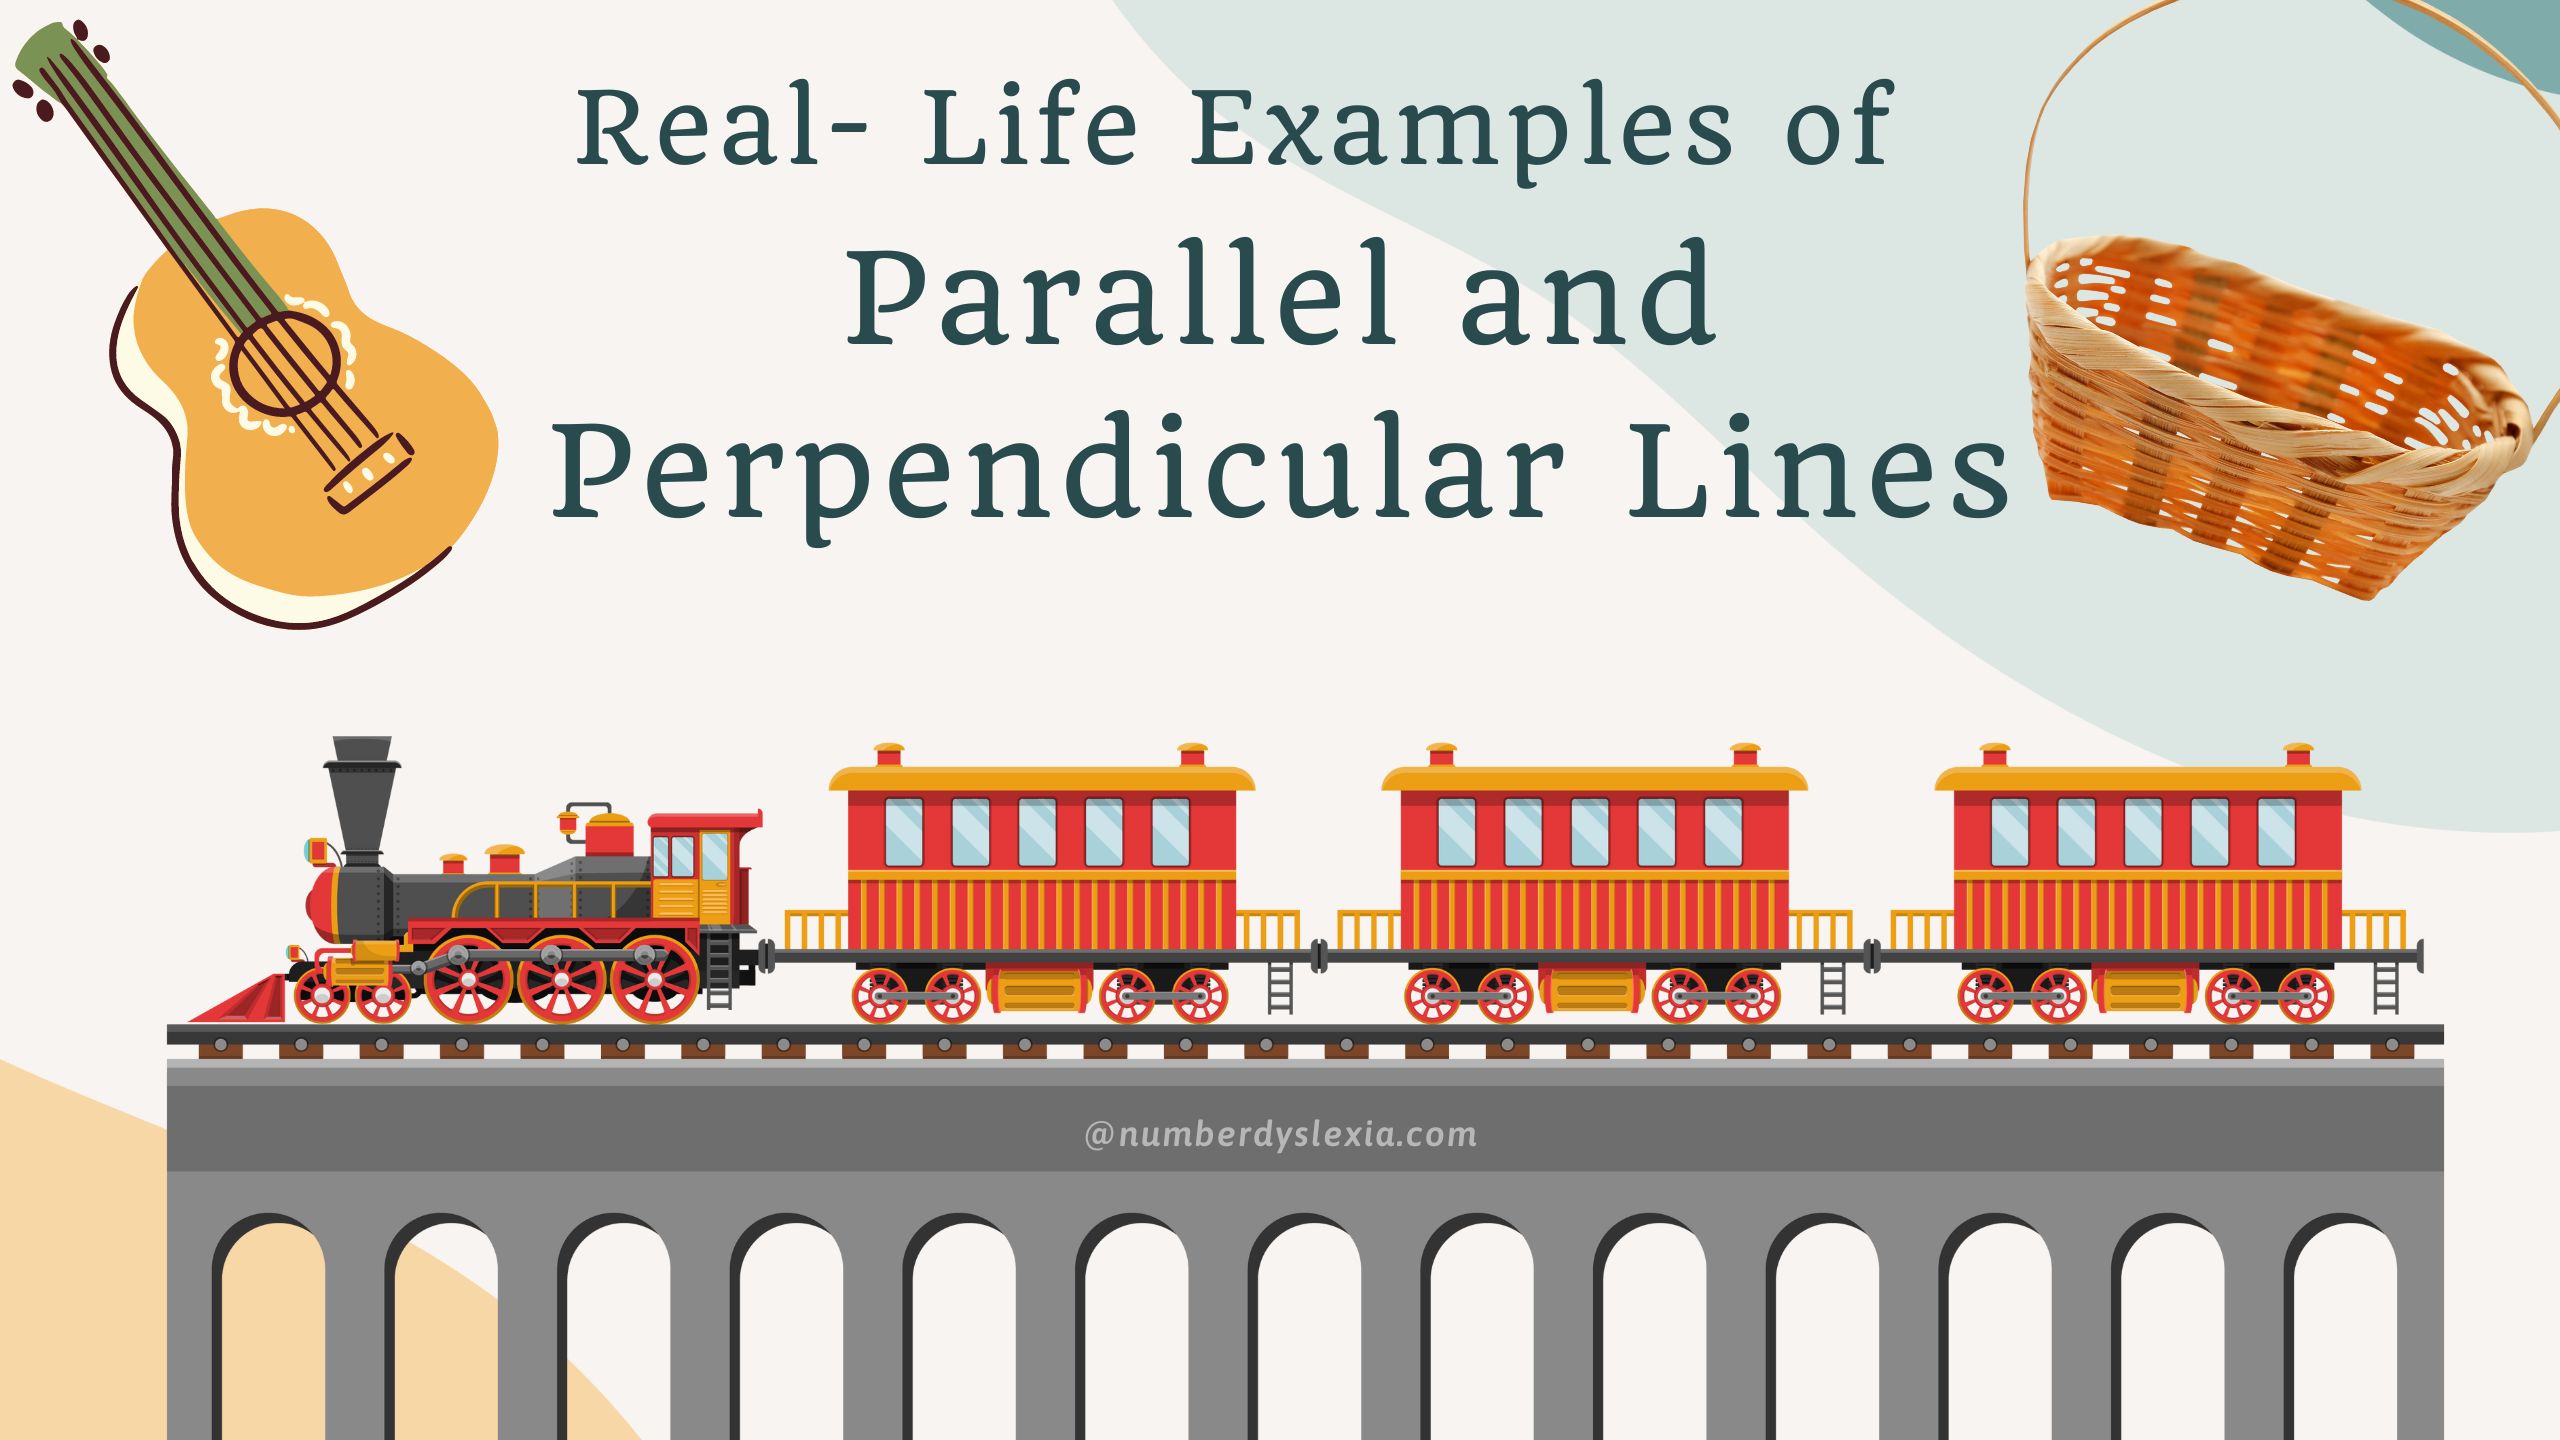 18 Real-Life Examples Of Parallel And Perpendicular Lines - Number Dyslexia